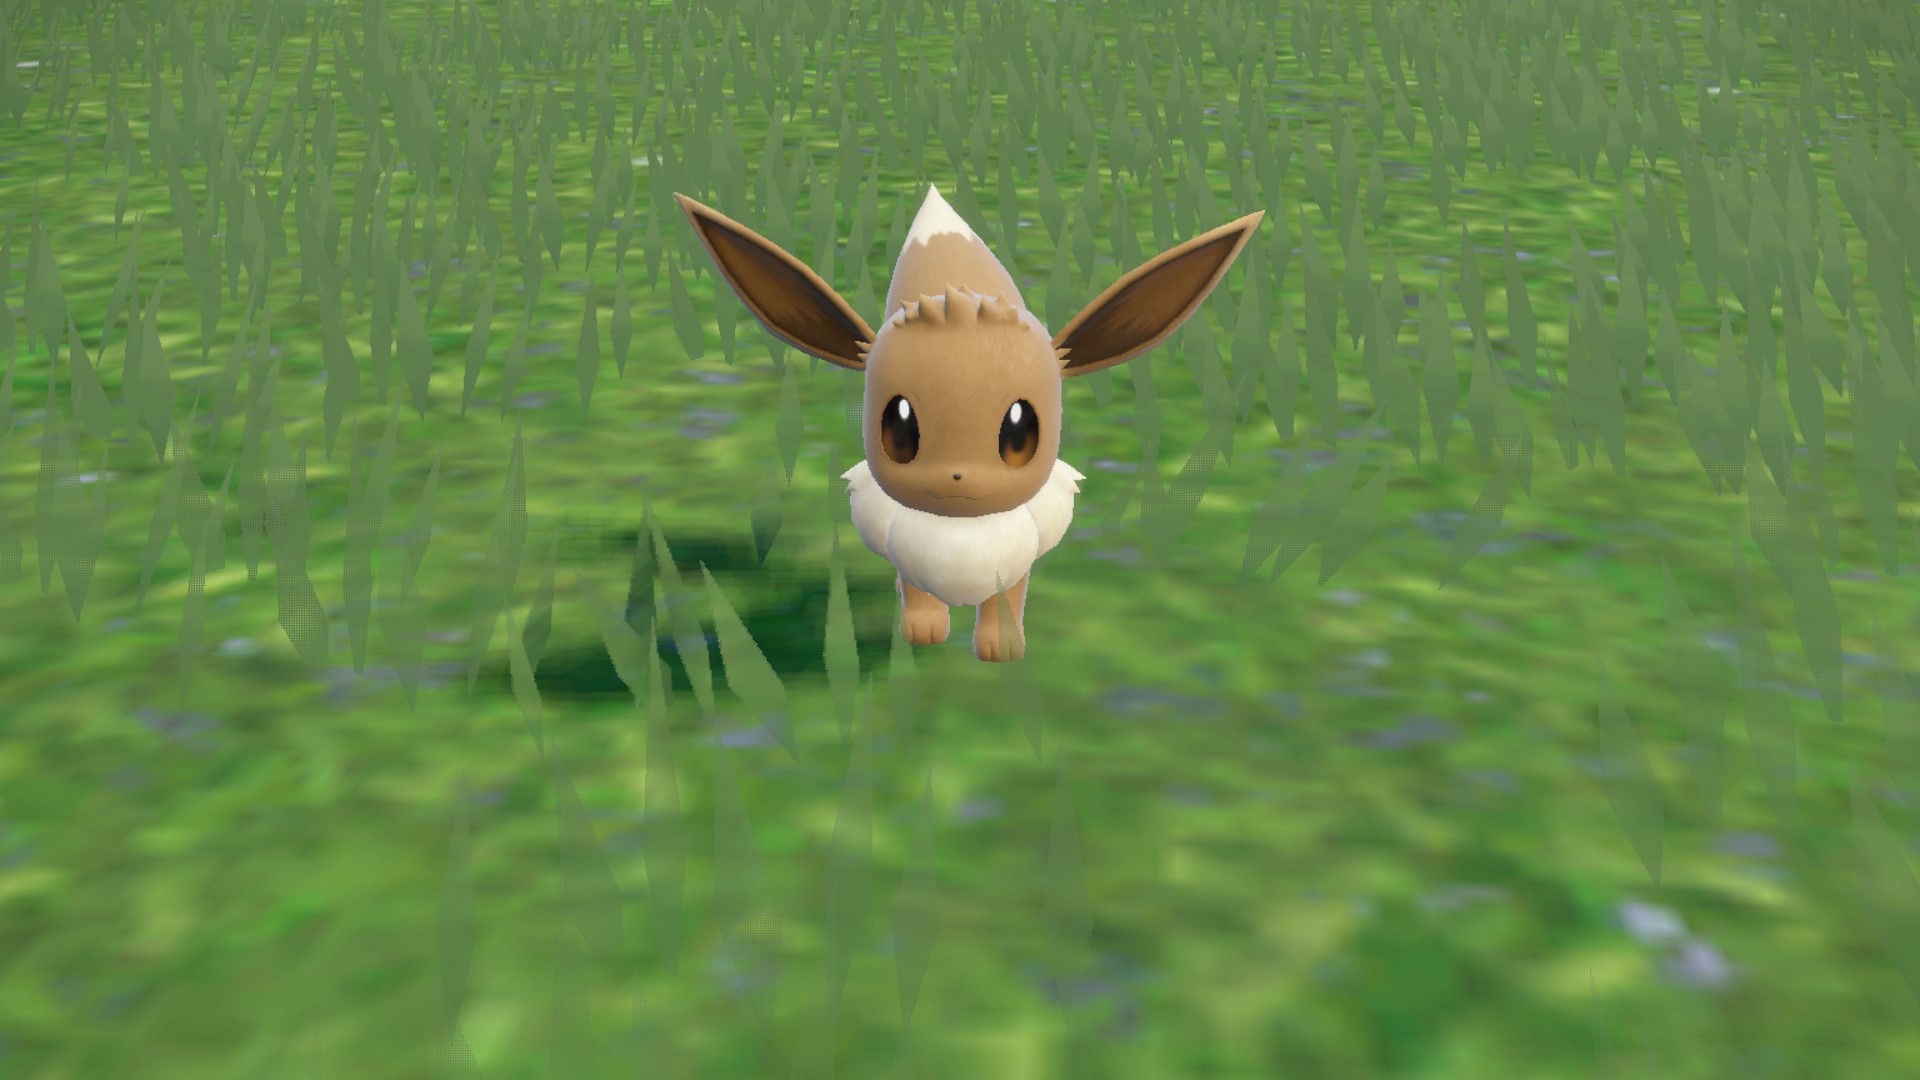 How to Get Eevee Pokemon Scarlet and Violet